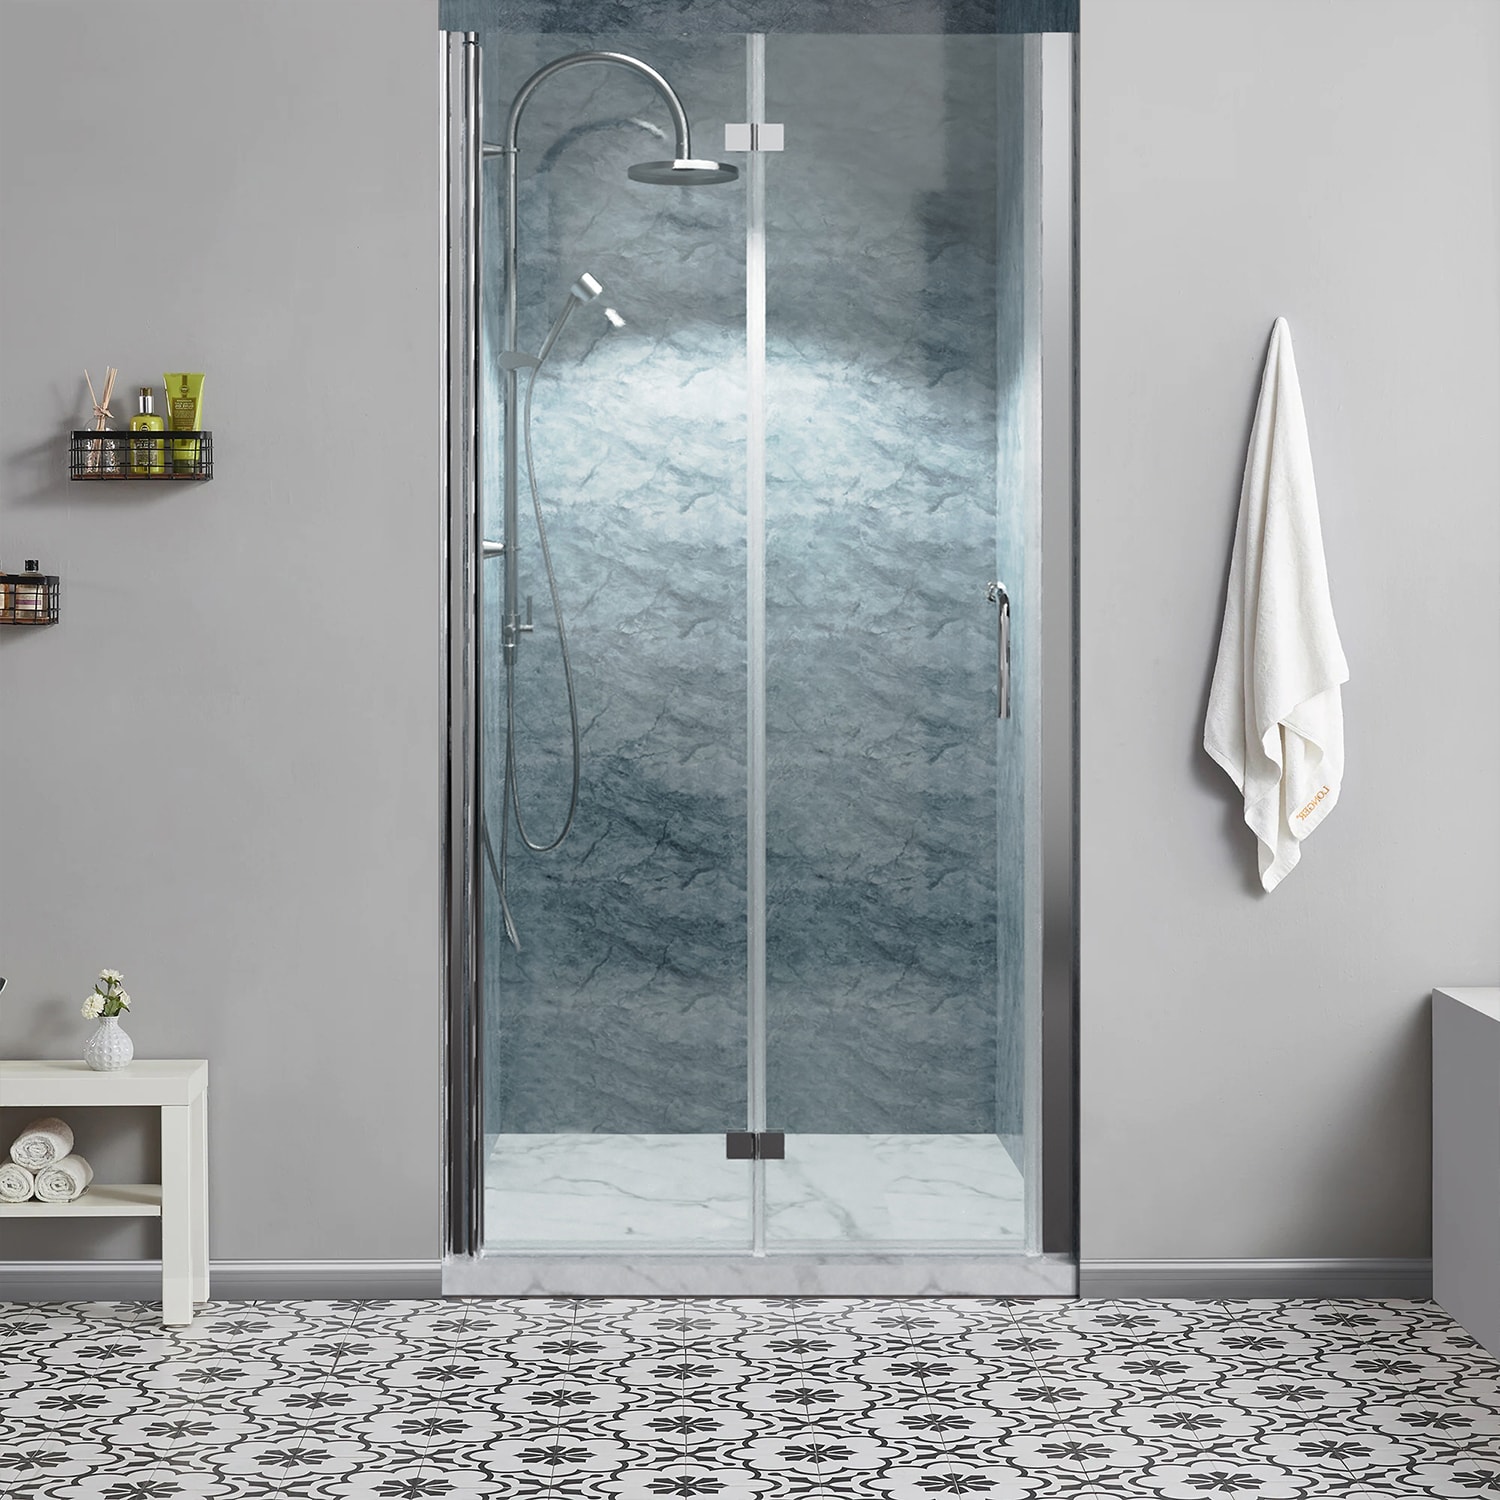 How to Clean Overlapping Sliding Shower Doors Without Leaving Streaks